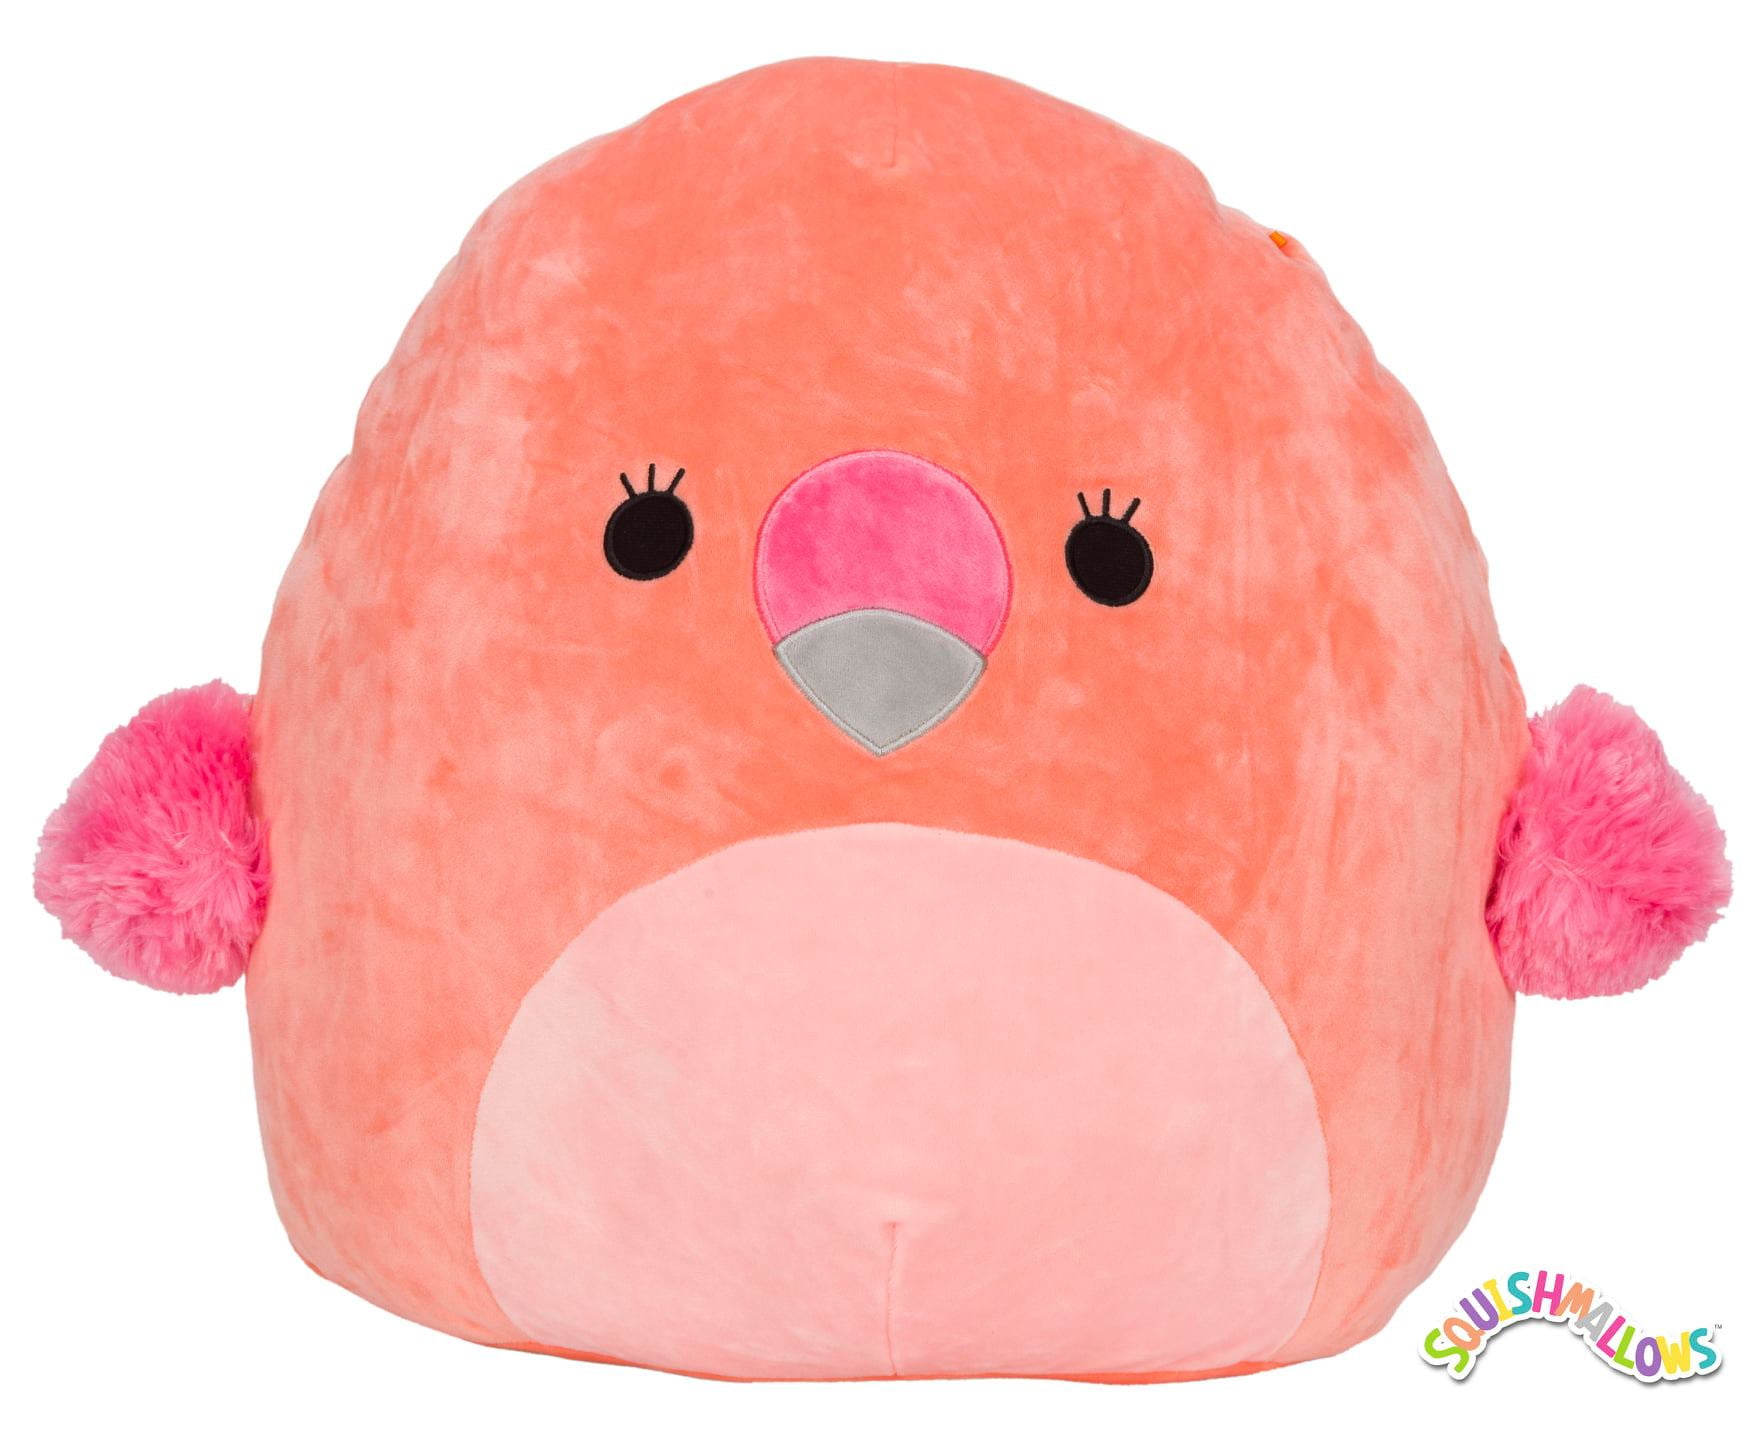 Squishmallows Flamingo Cody 16 inch Plush Toy - 953258 for sale online